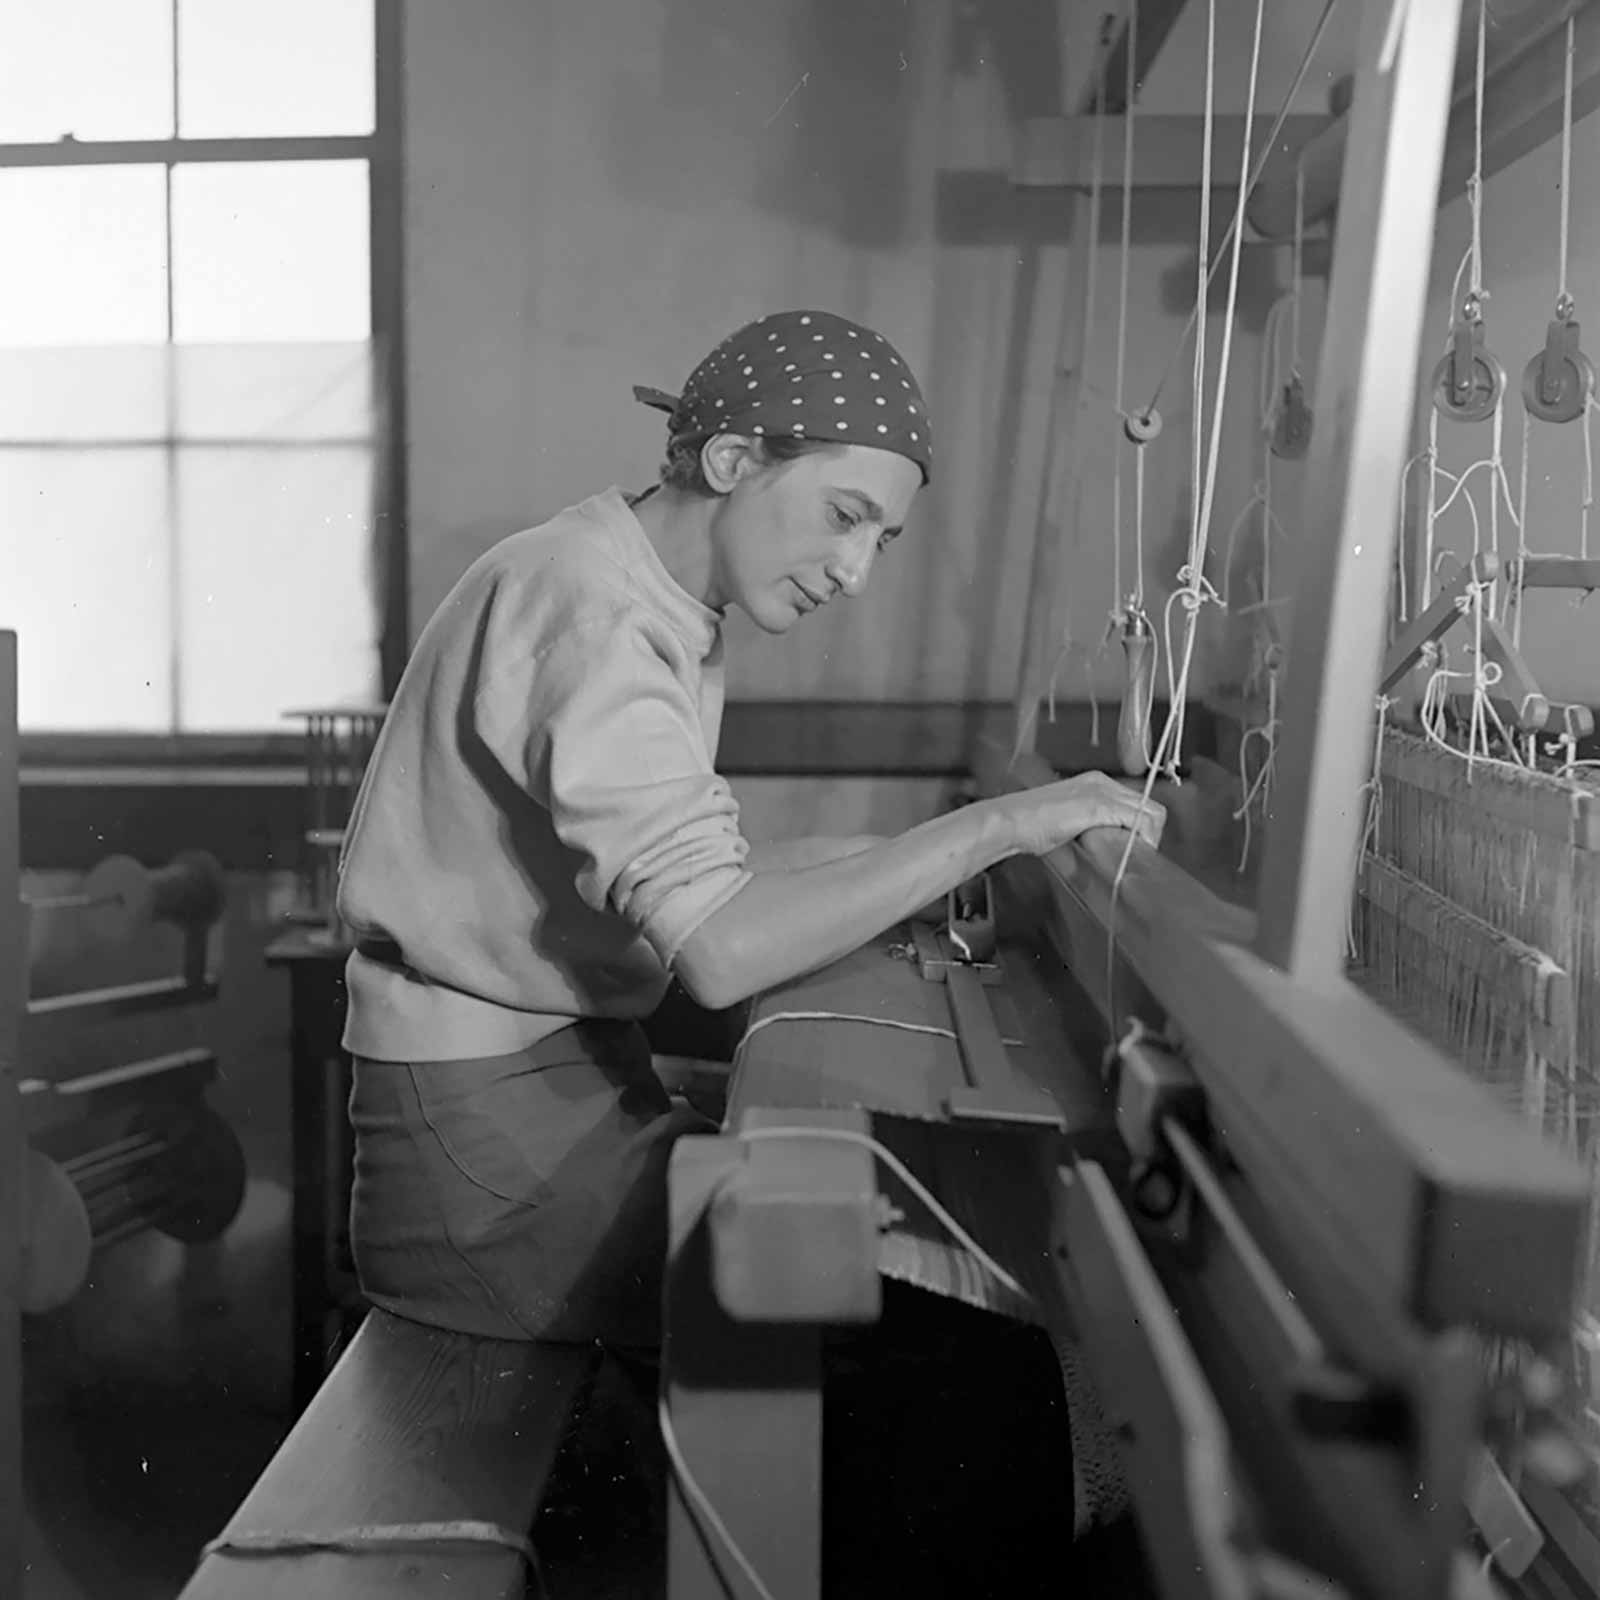 Photograph by Helen M. Post of Anni Albers in her weaving studio at Black Mountain College, 1937